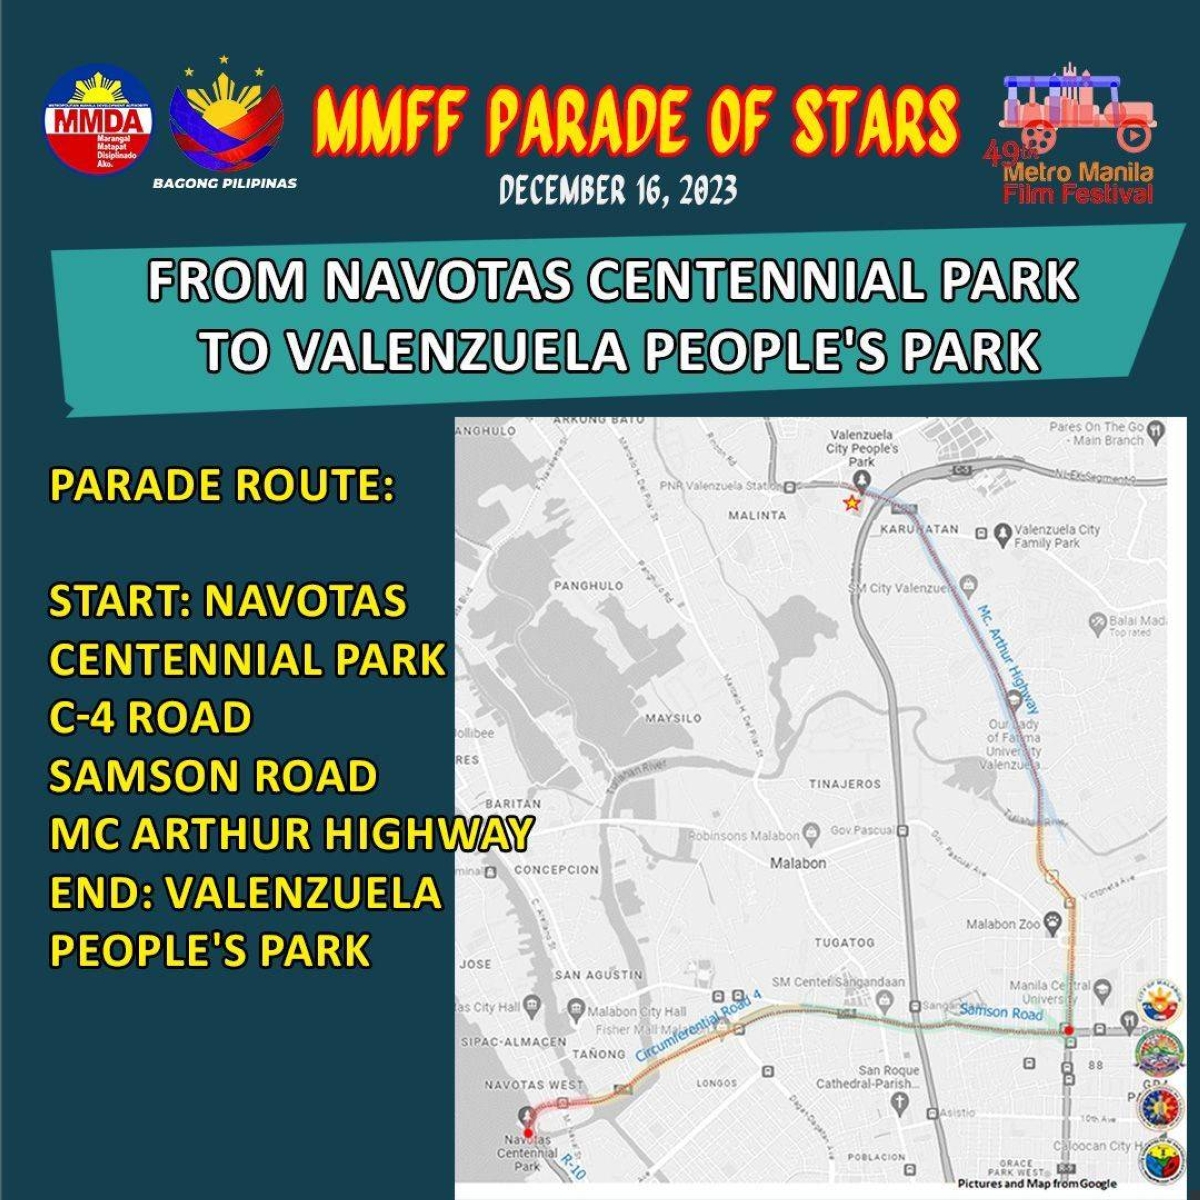 MMFF Parade of Stars to roll out in 4 cities